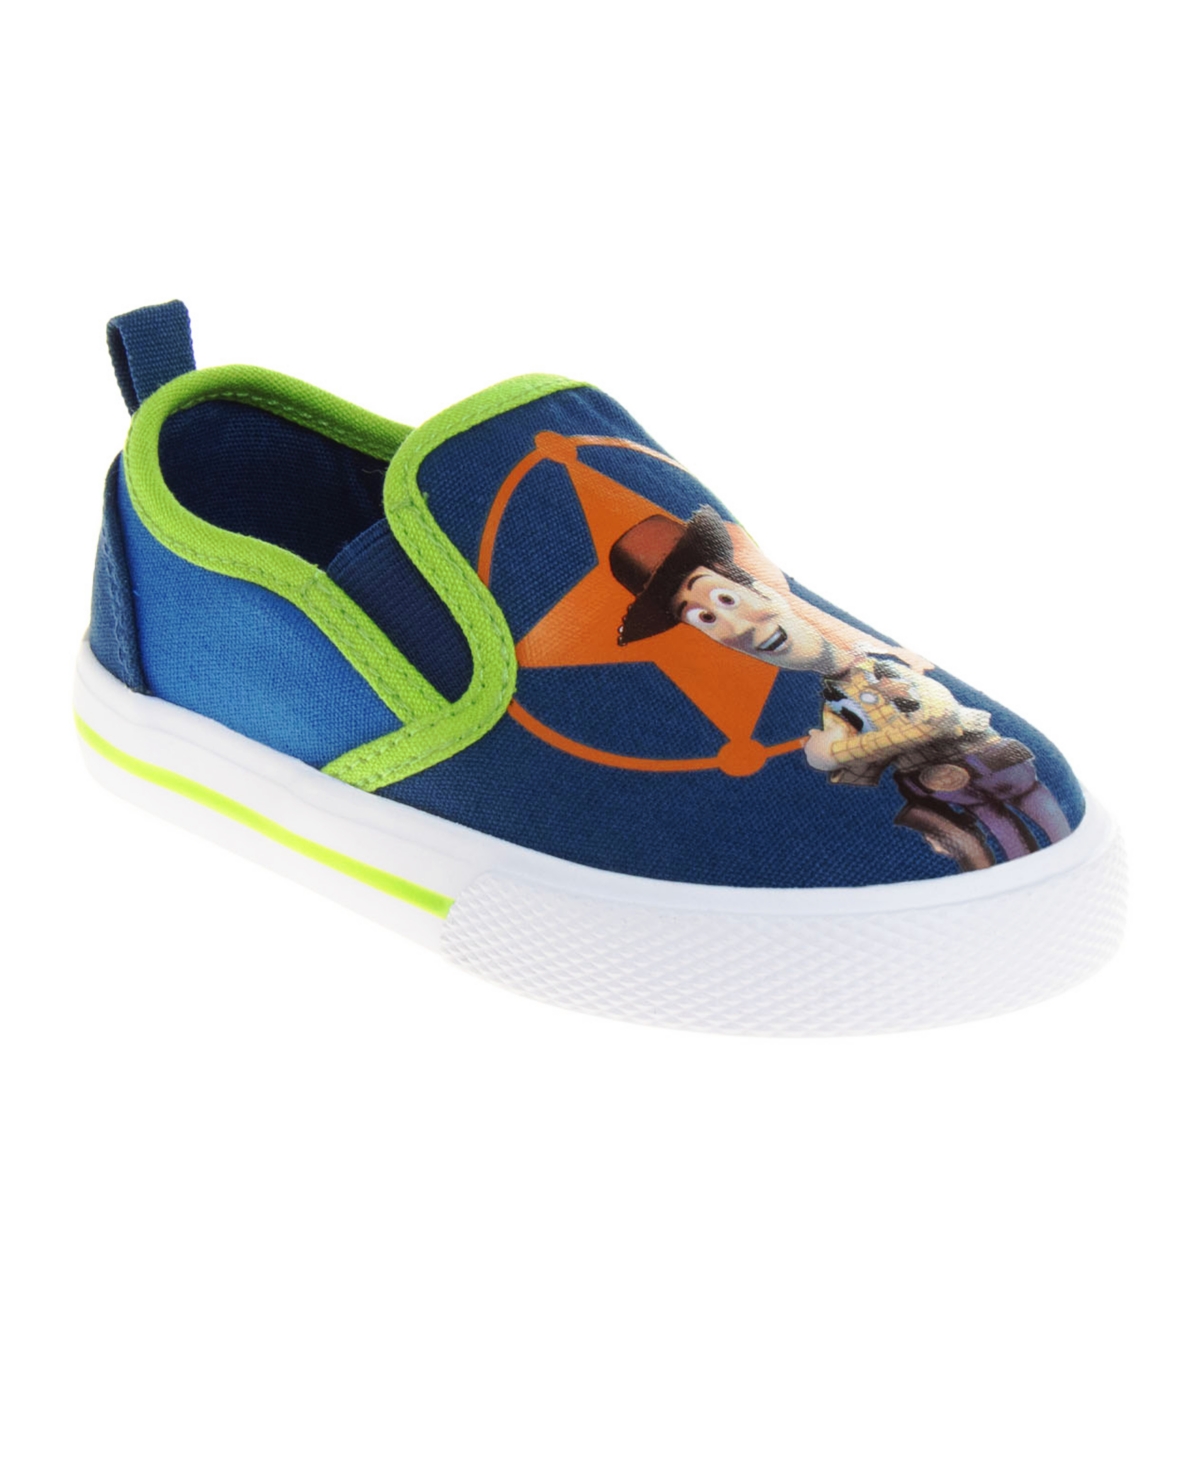 Shop Disney Toddler Boys Toy Story Slip On Canvas Sneakers In Navy,green